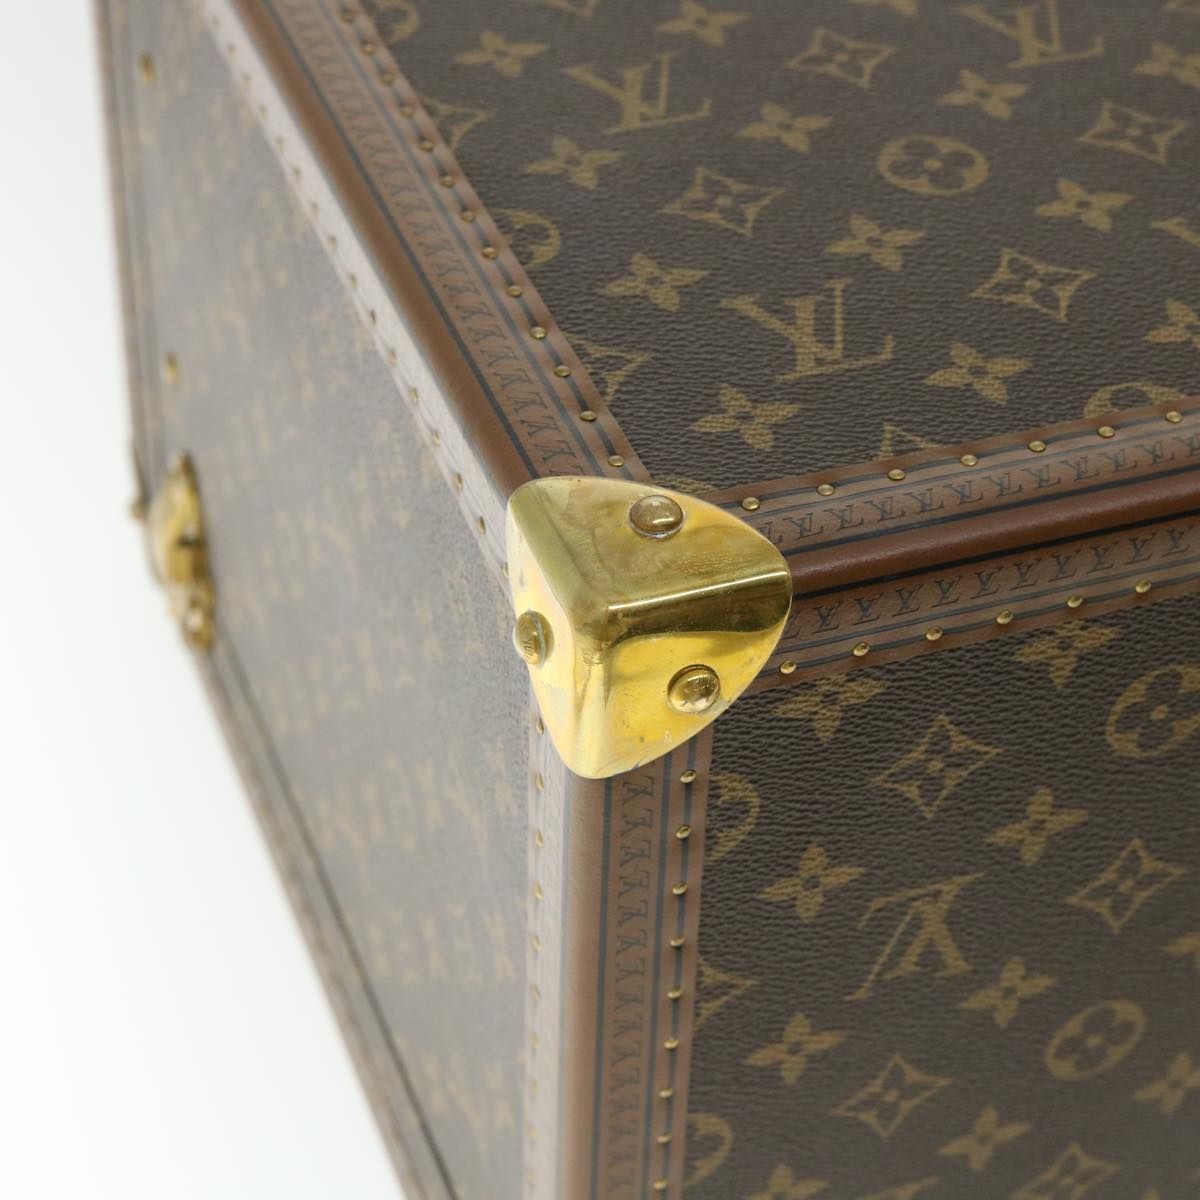 Authenticated Used Louis Vuitton Monogram Champagne Case M21825 Trunk Set 